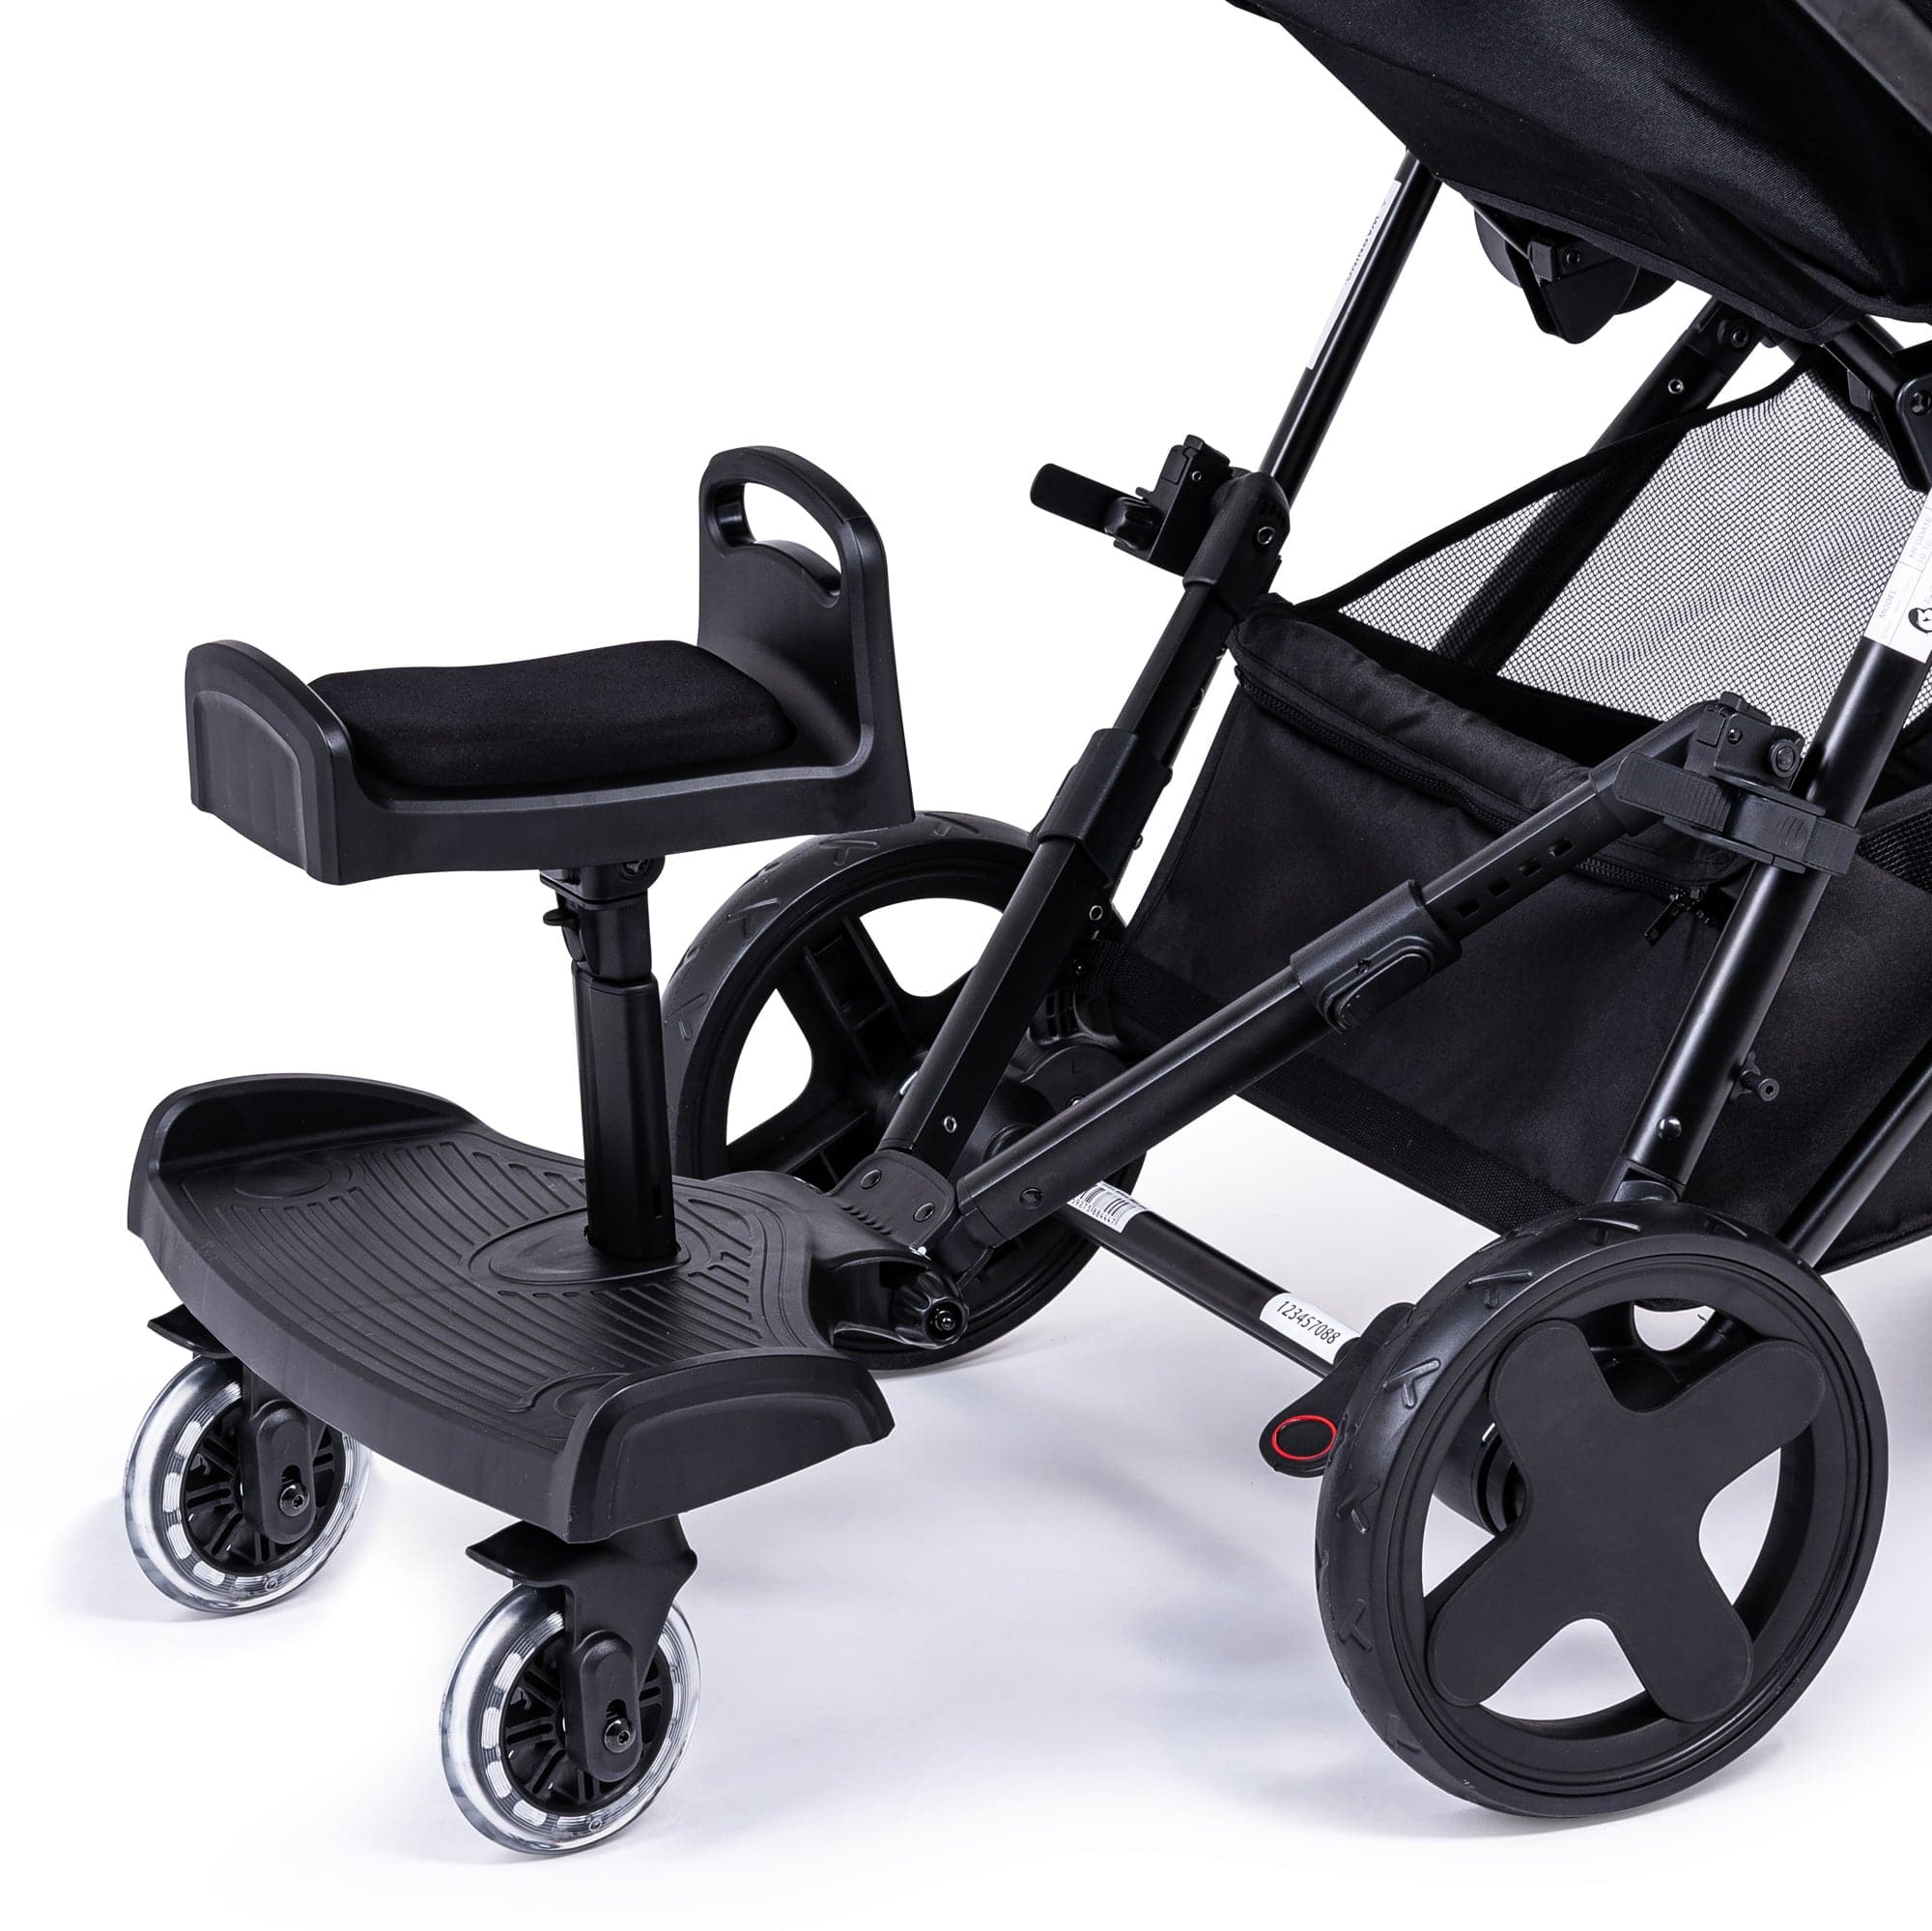 Ride On Board with Saddle Compatible with Stokke - For Your Little One